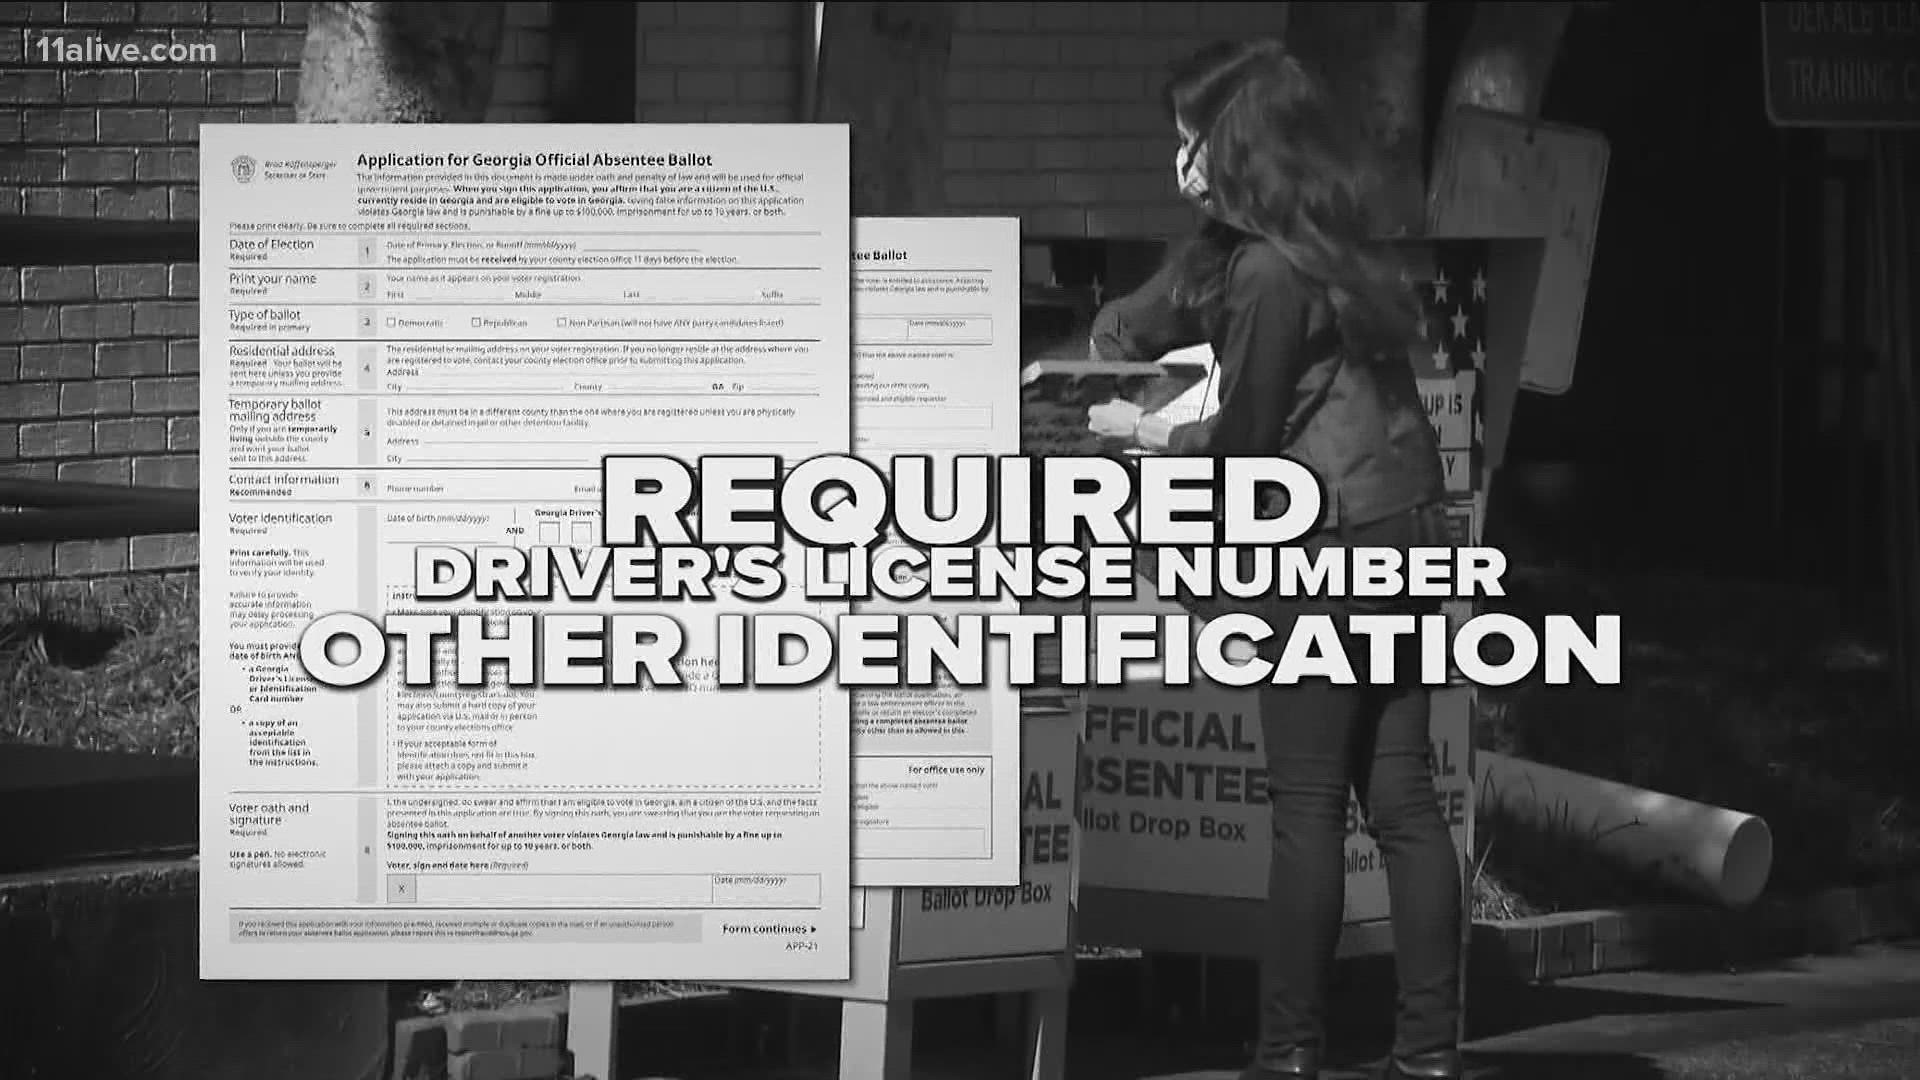 It requires voters to submit their driver's license number or ID, which is a change mandated by the state's new voting law.